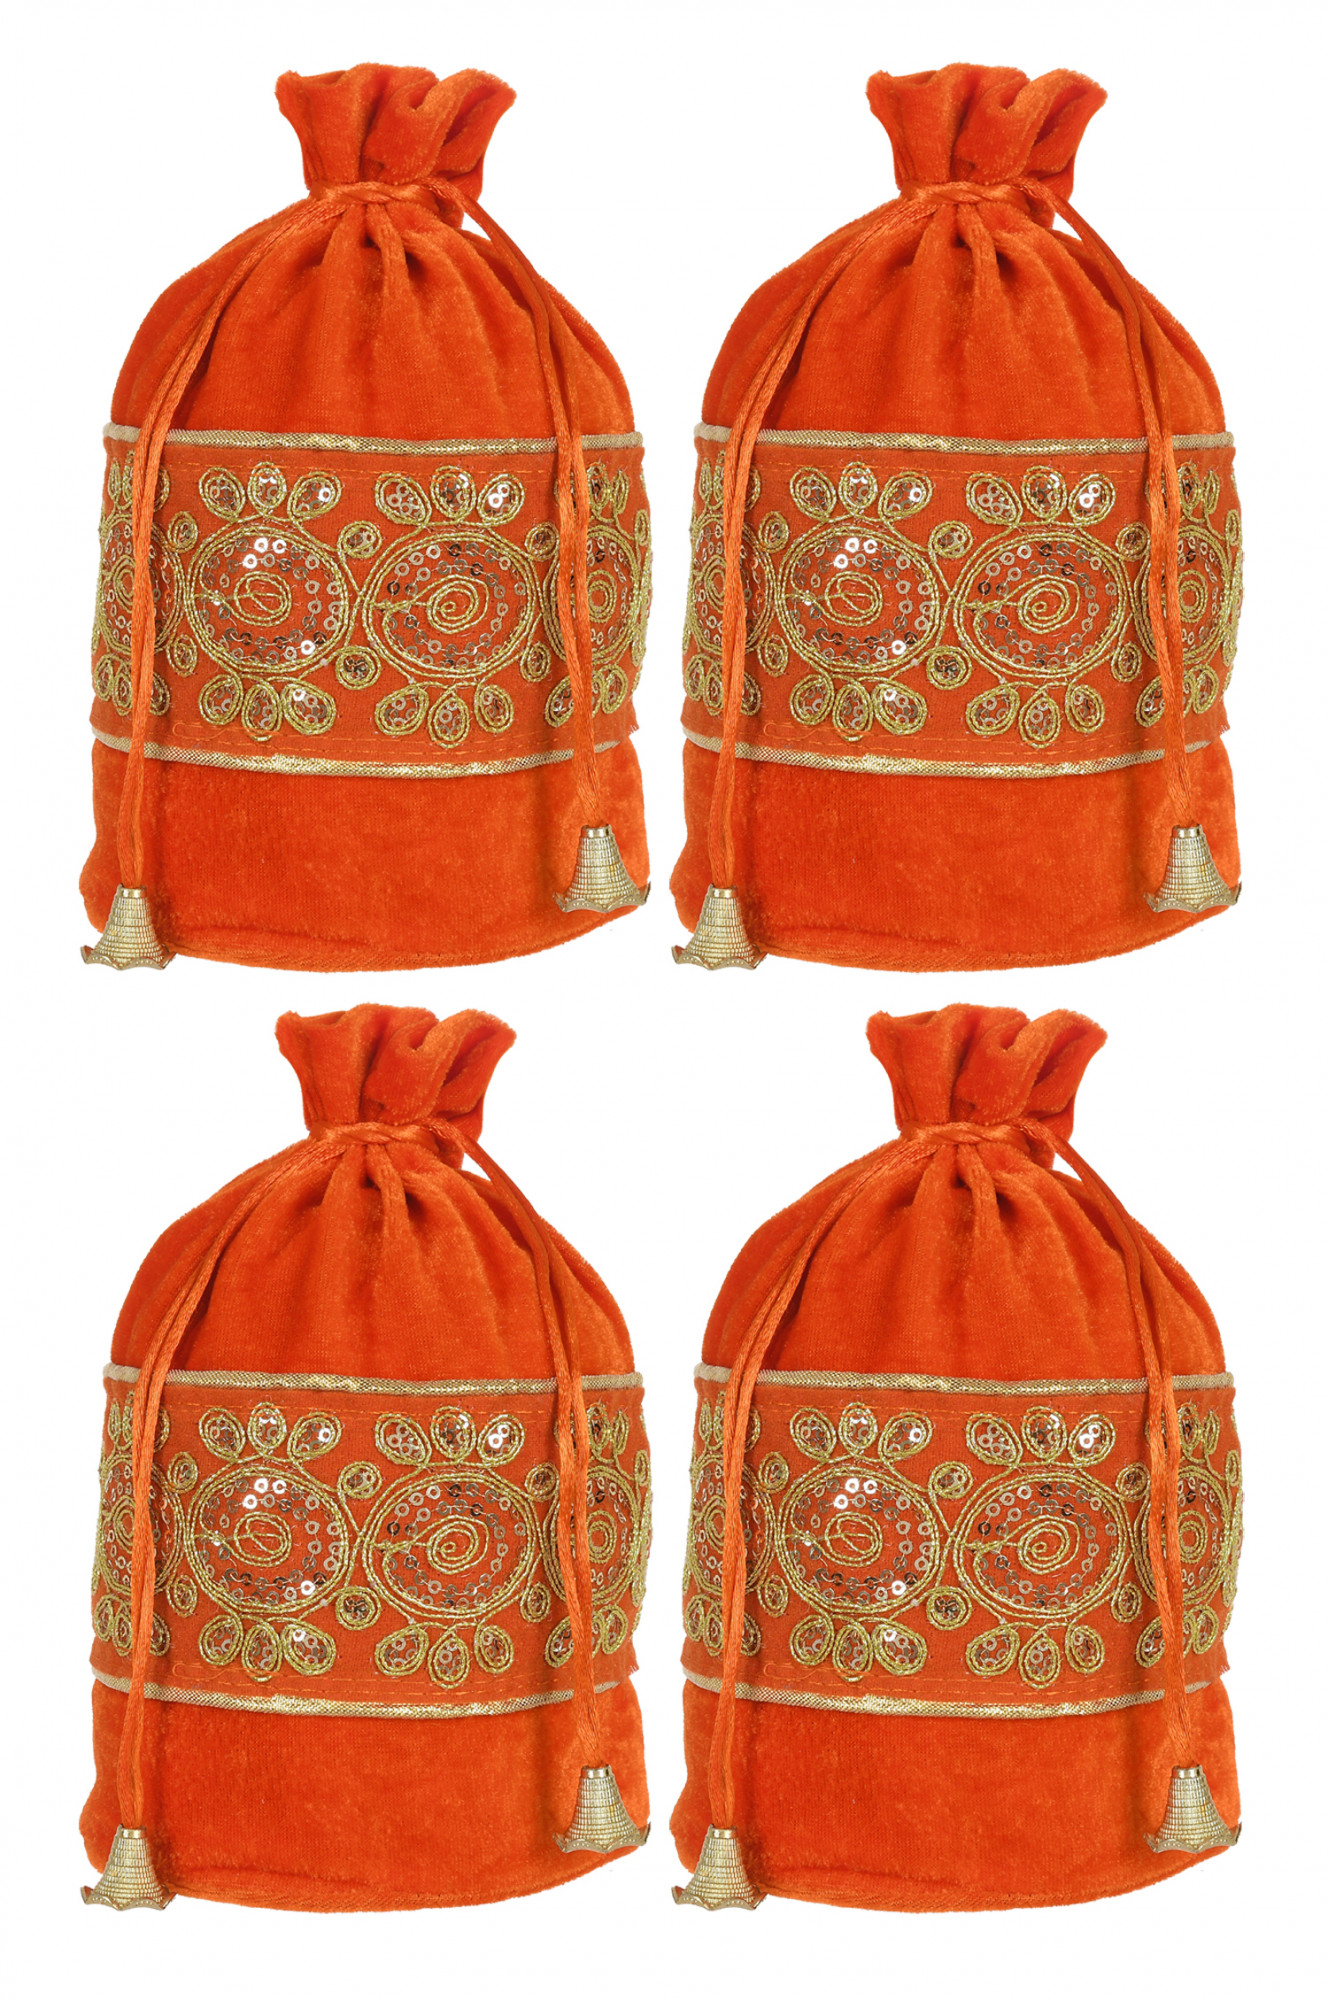 Kuber Industries Embroidered Design Drawstring Potli Bag Party Wedding Favor Gift Jewelry Bags-(Orange)